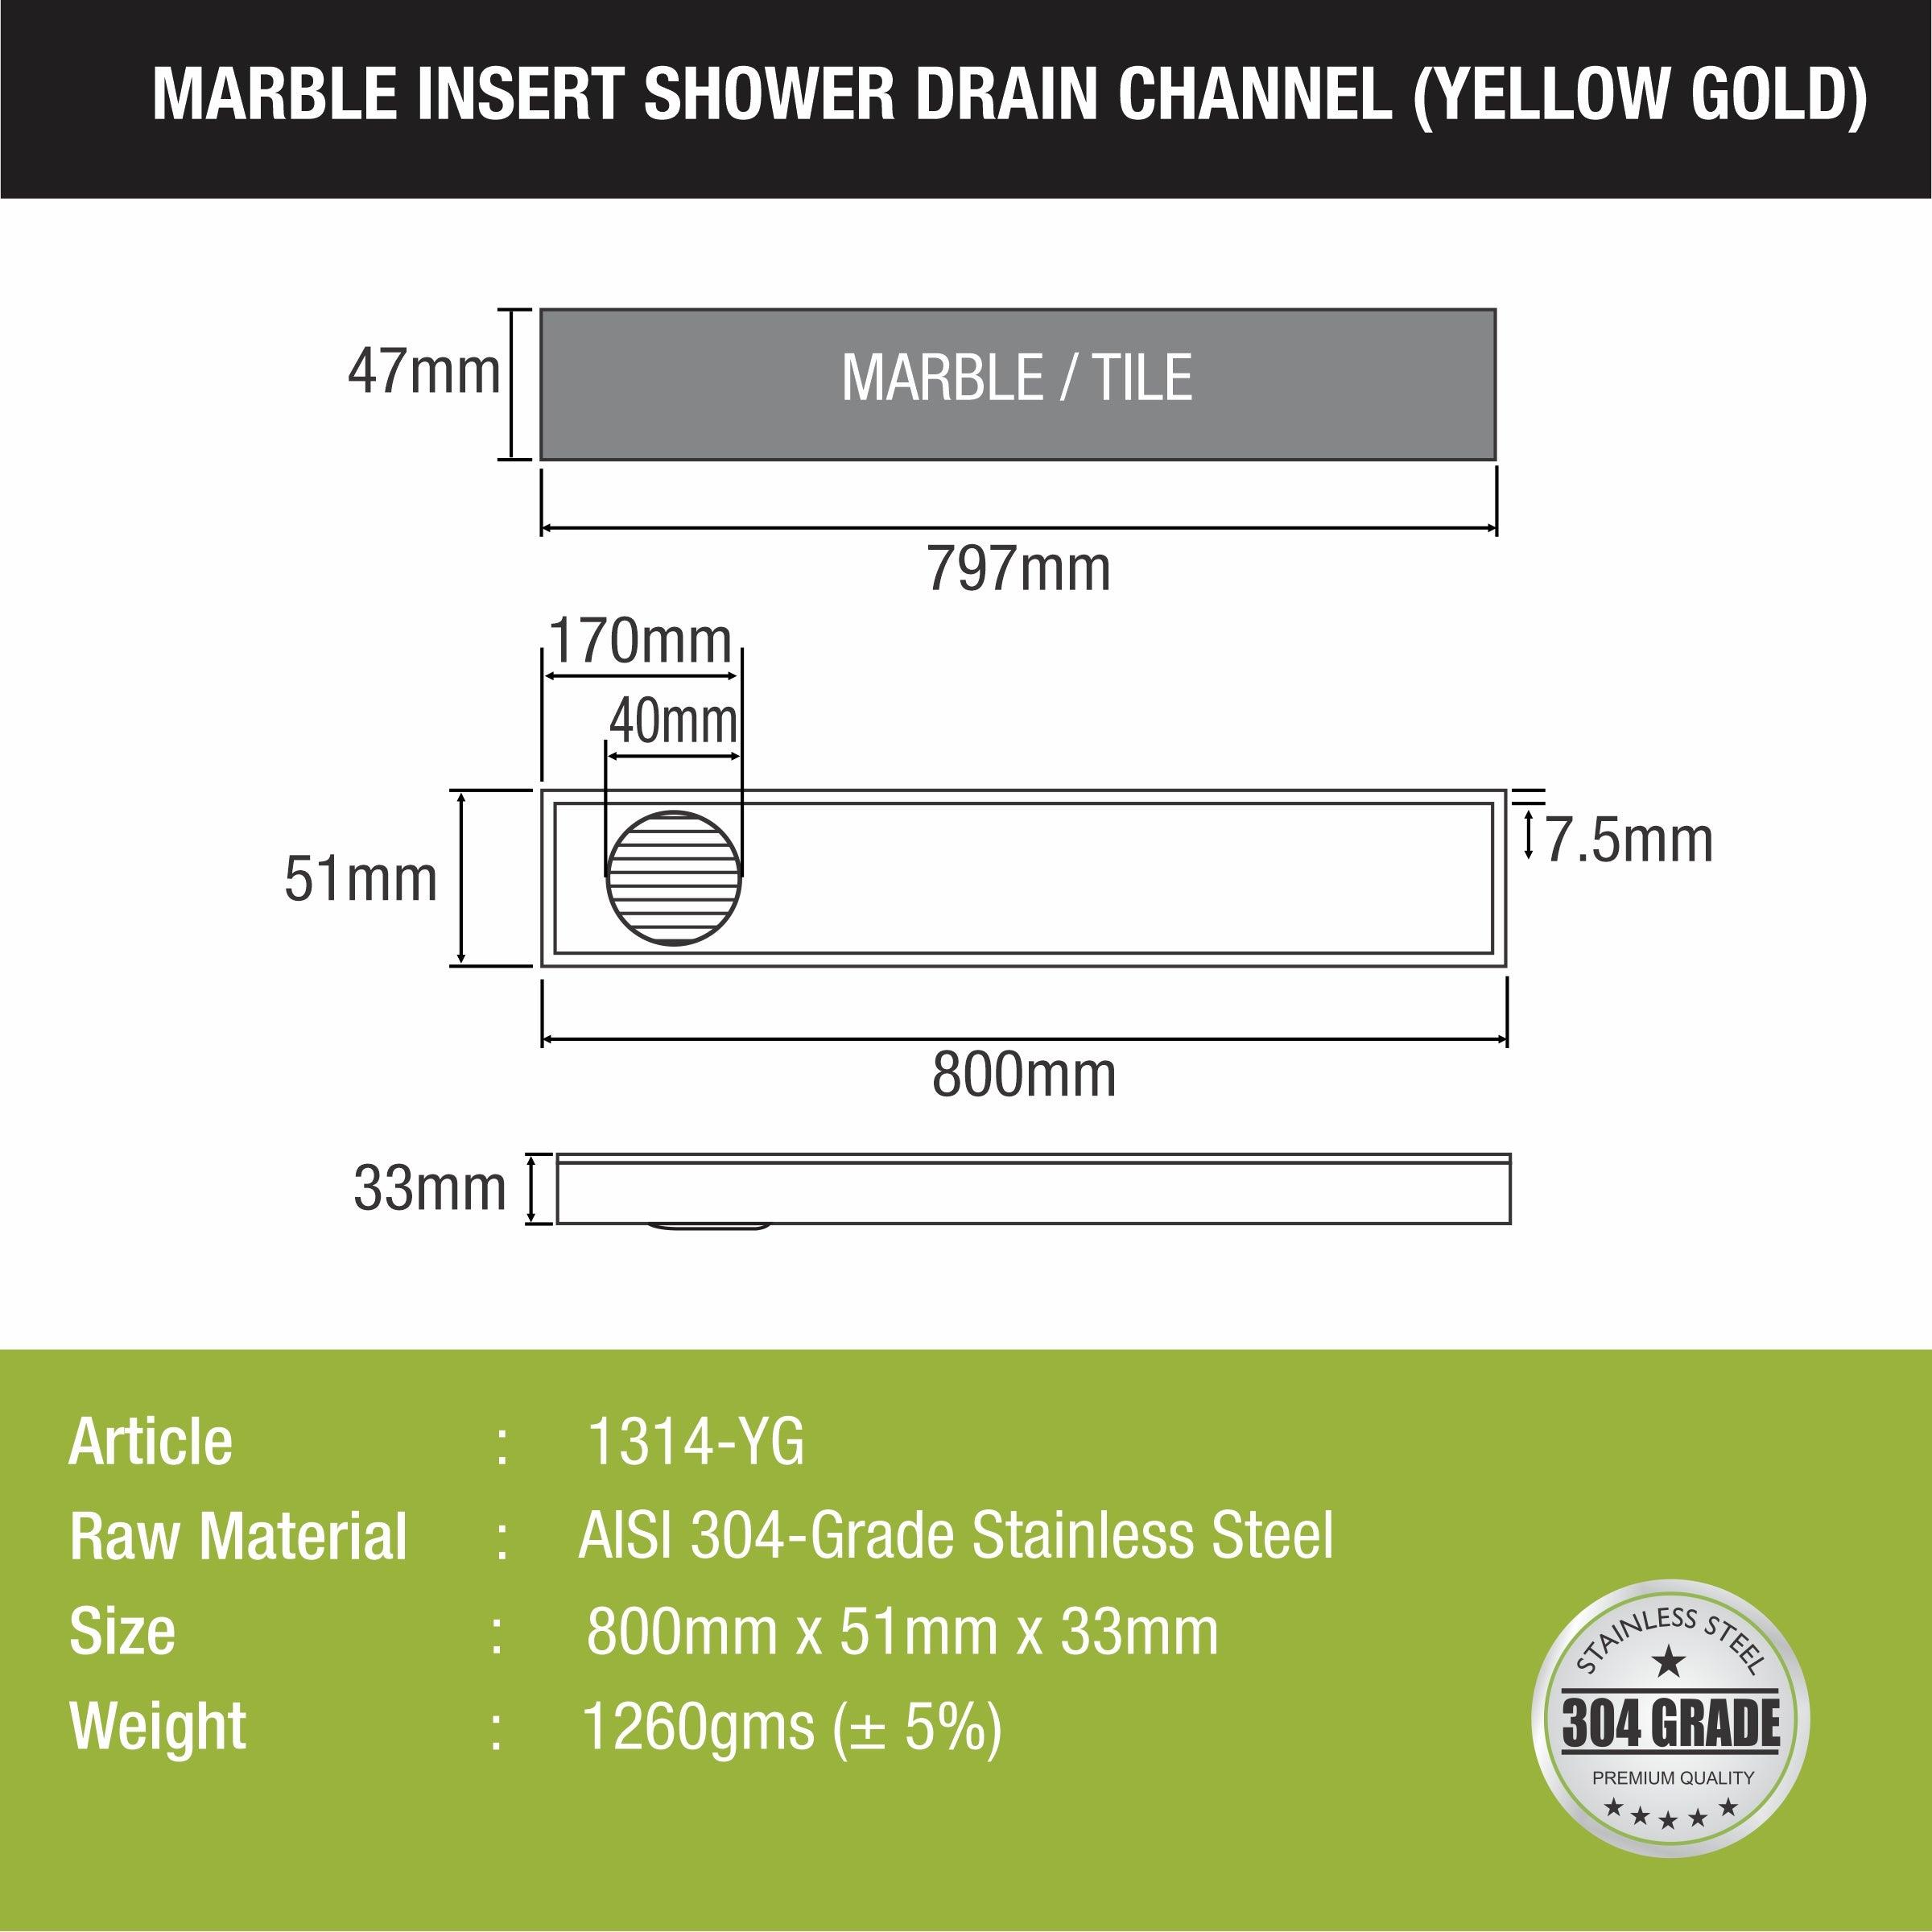 Marble Insert Shower Drain Channel - Yellow Gold (32 x 2 Inches) sizes and dimensions